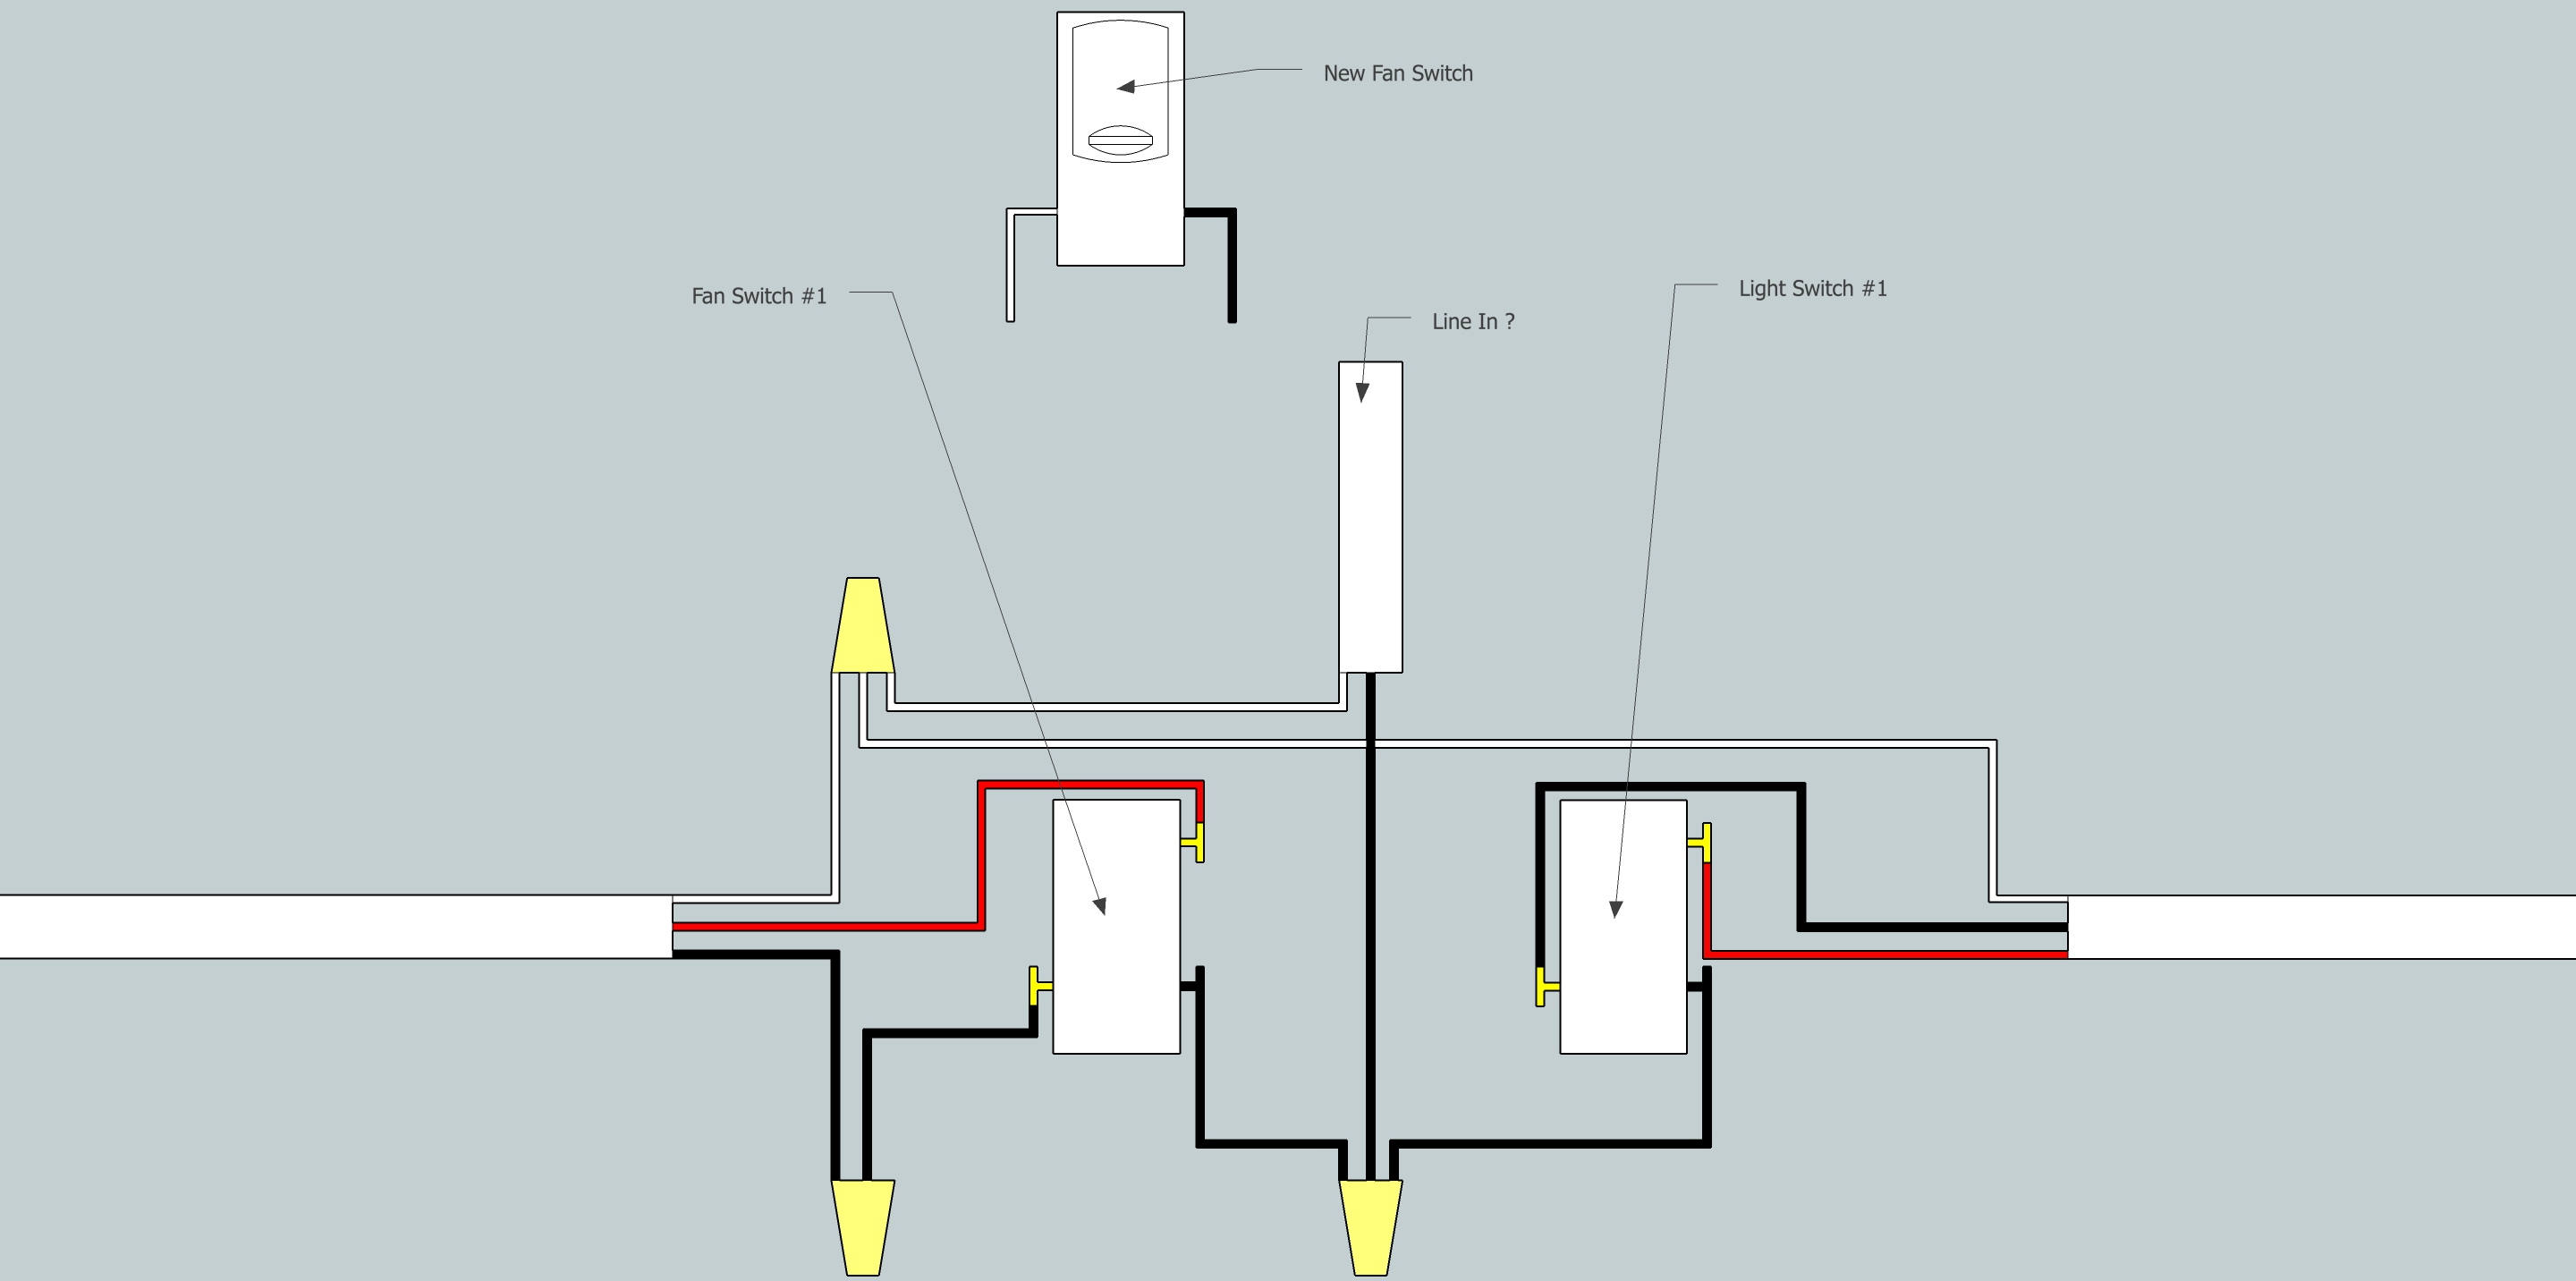 Electrical - Need Help Adding Fan To Existing 3-Way Switch Setup - 3Way Switch Wiring Diagram